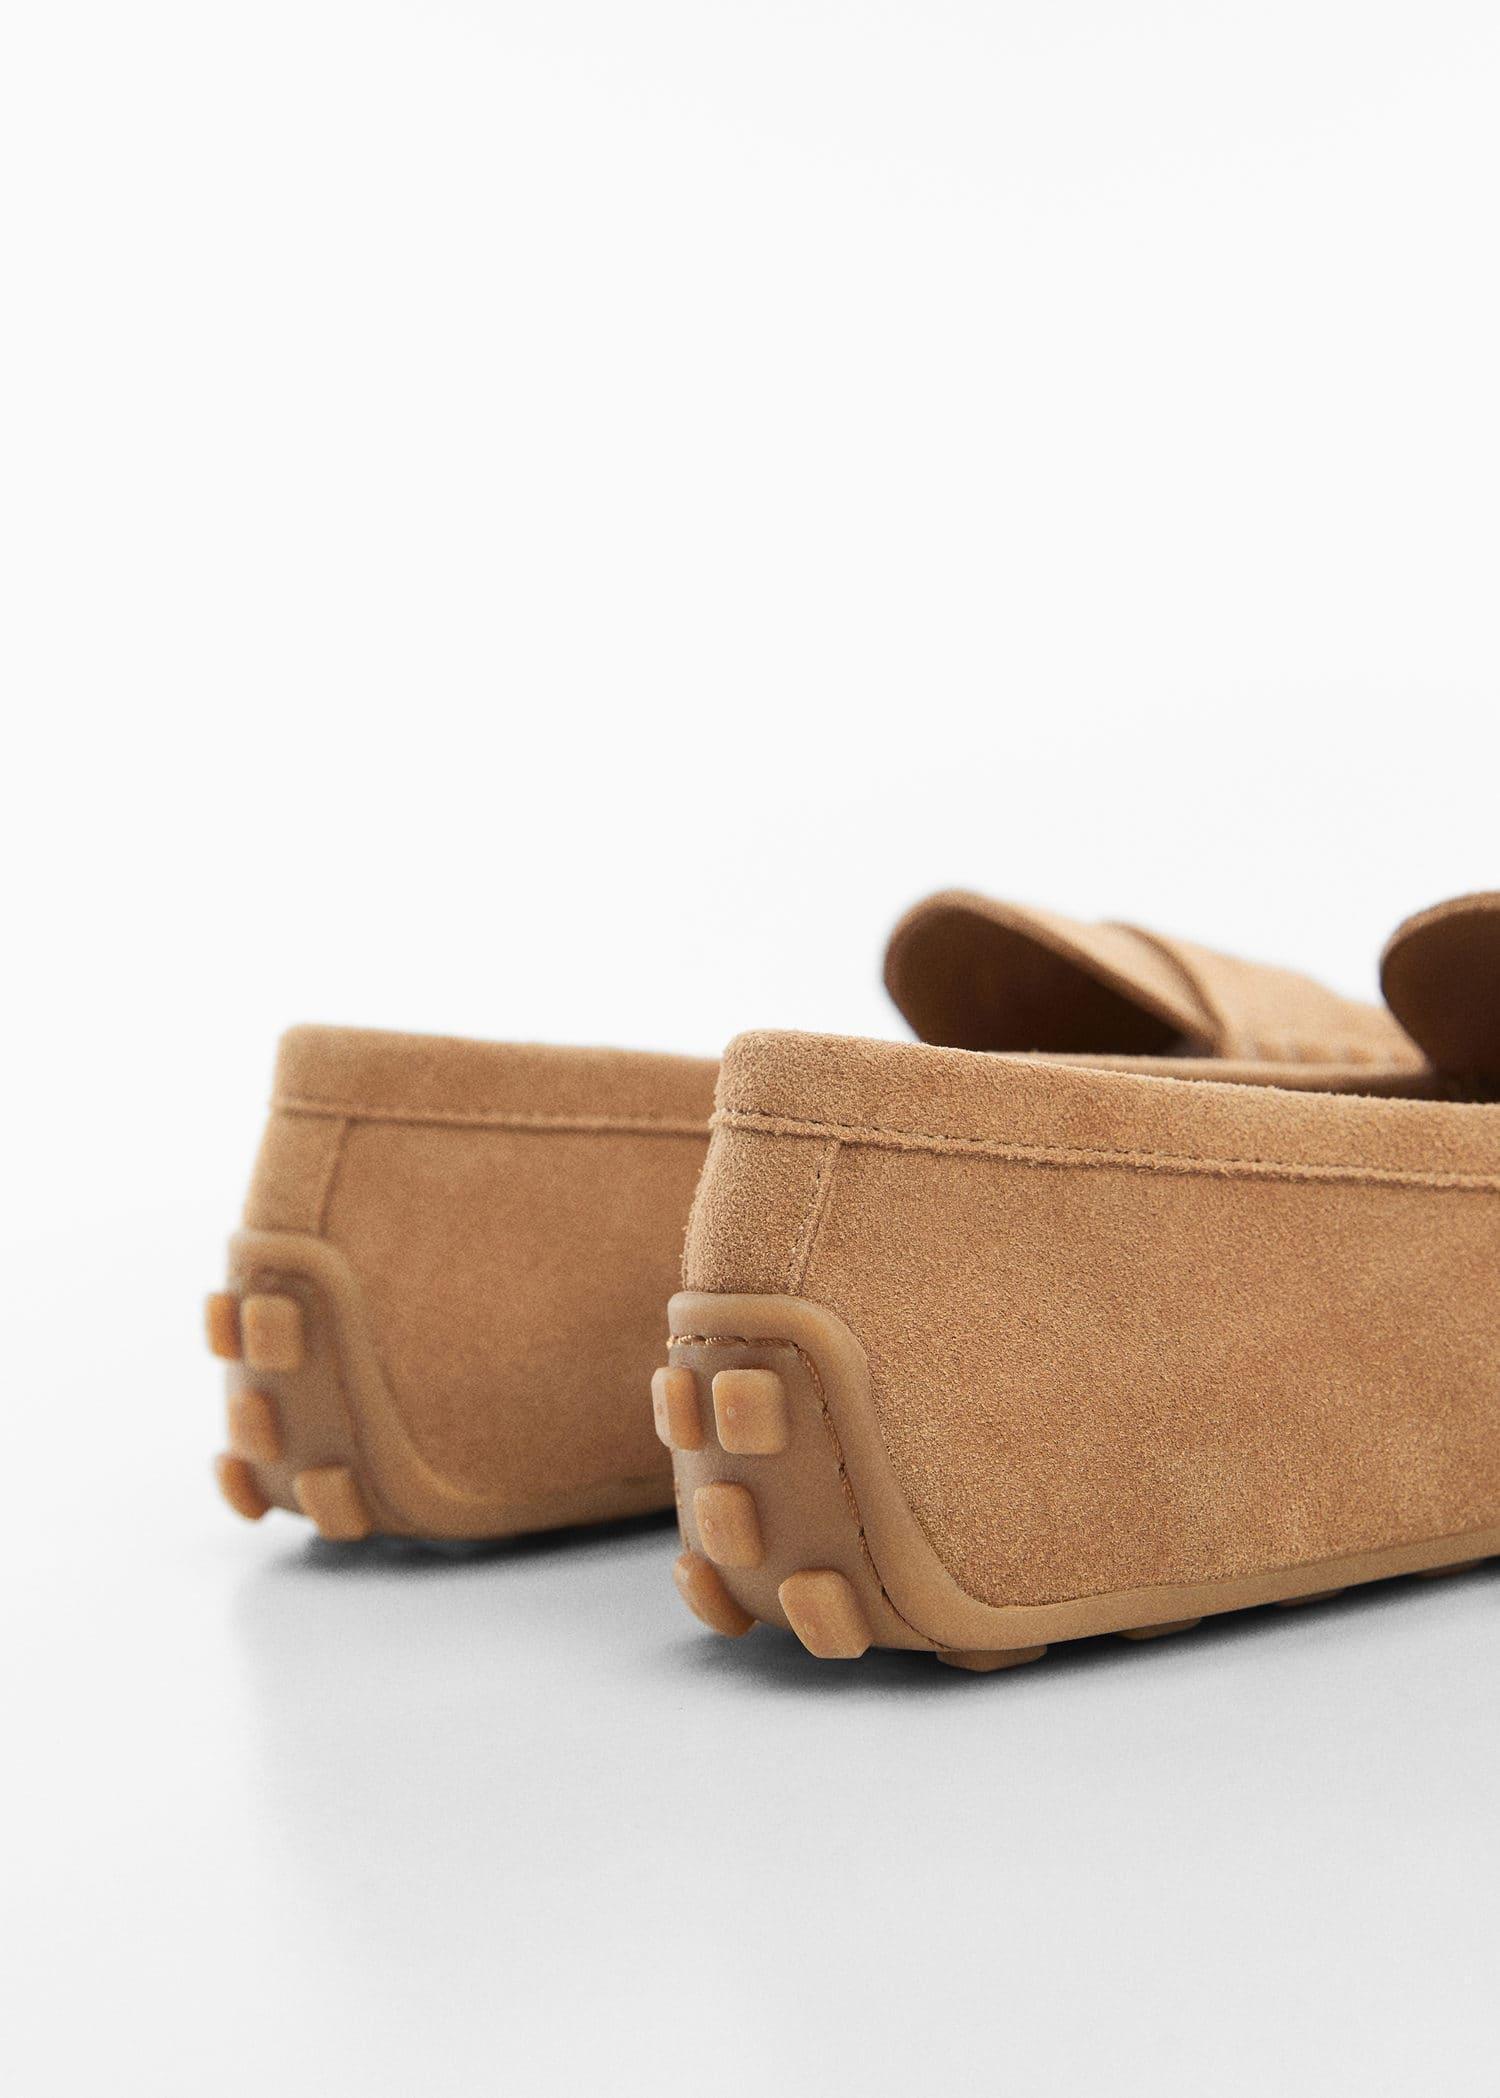 Mango - Brown Suede Leather Moccasin